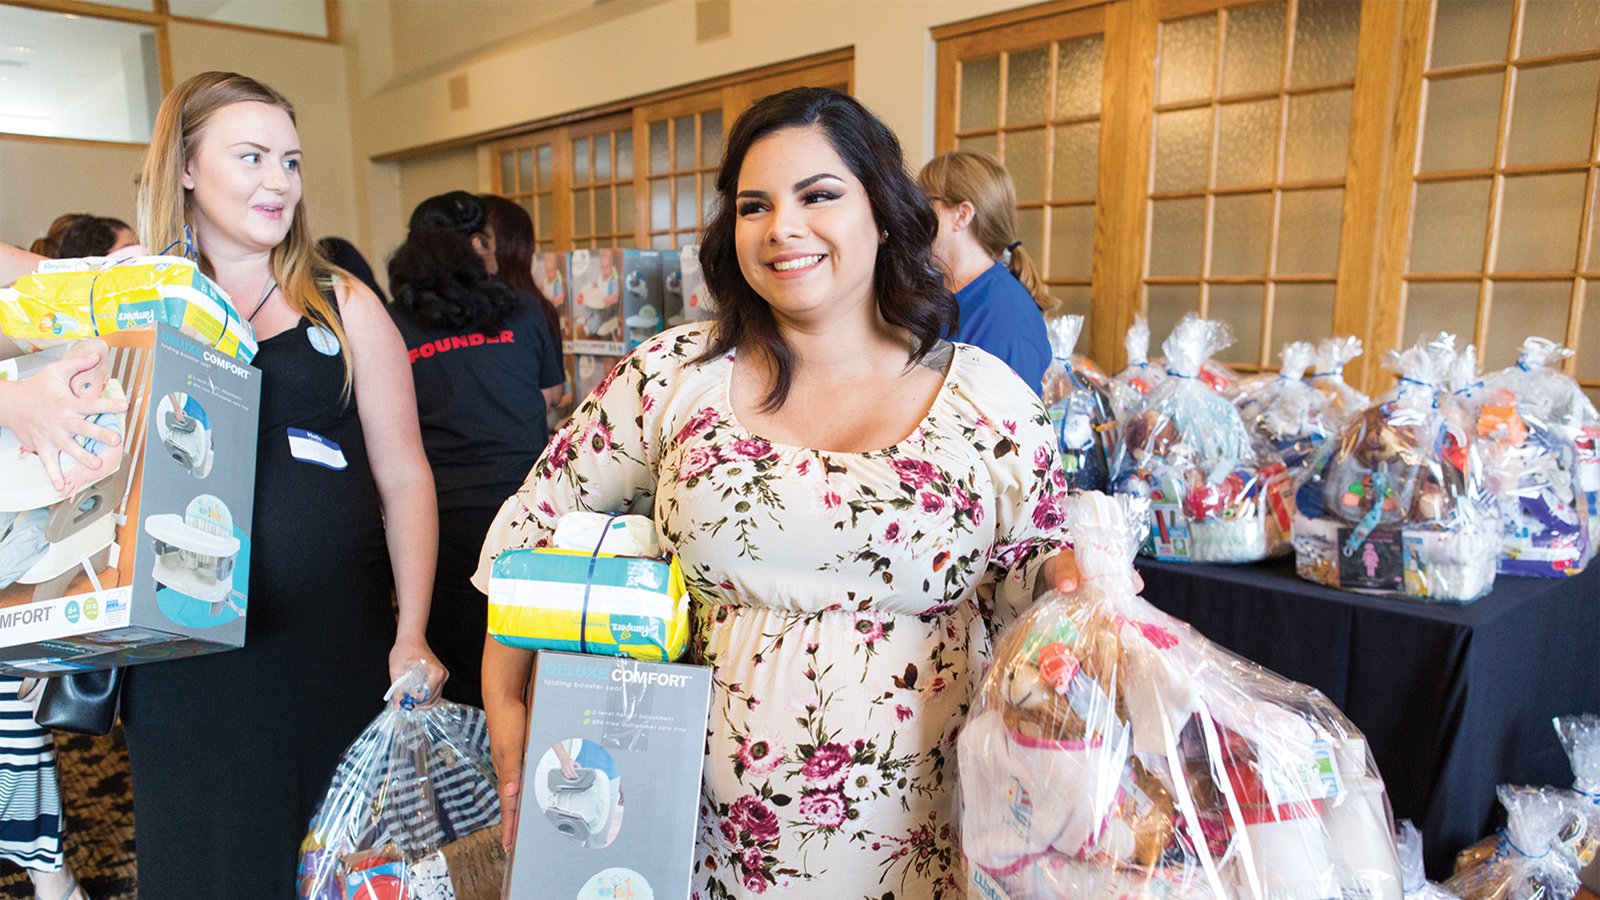 Pregnant person holding baby items at a military baby shower